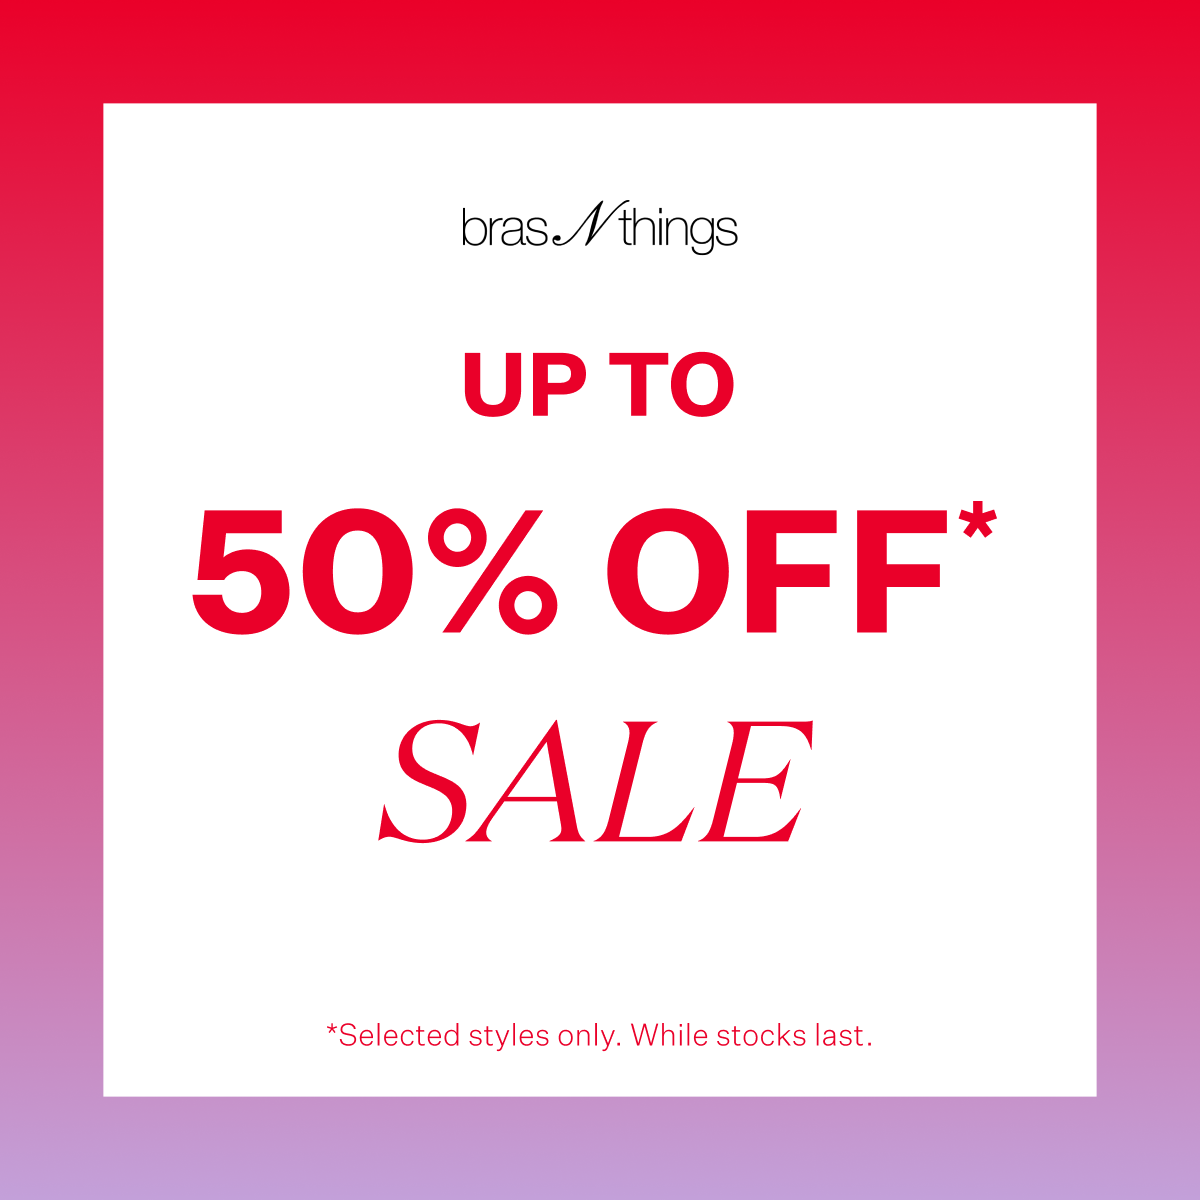 Bras N Things: Up to 50% off mid season sale at Westfield Chermside